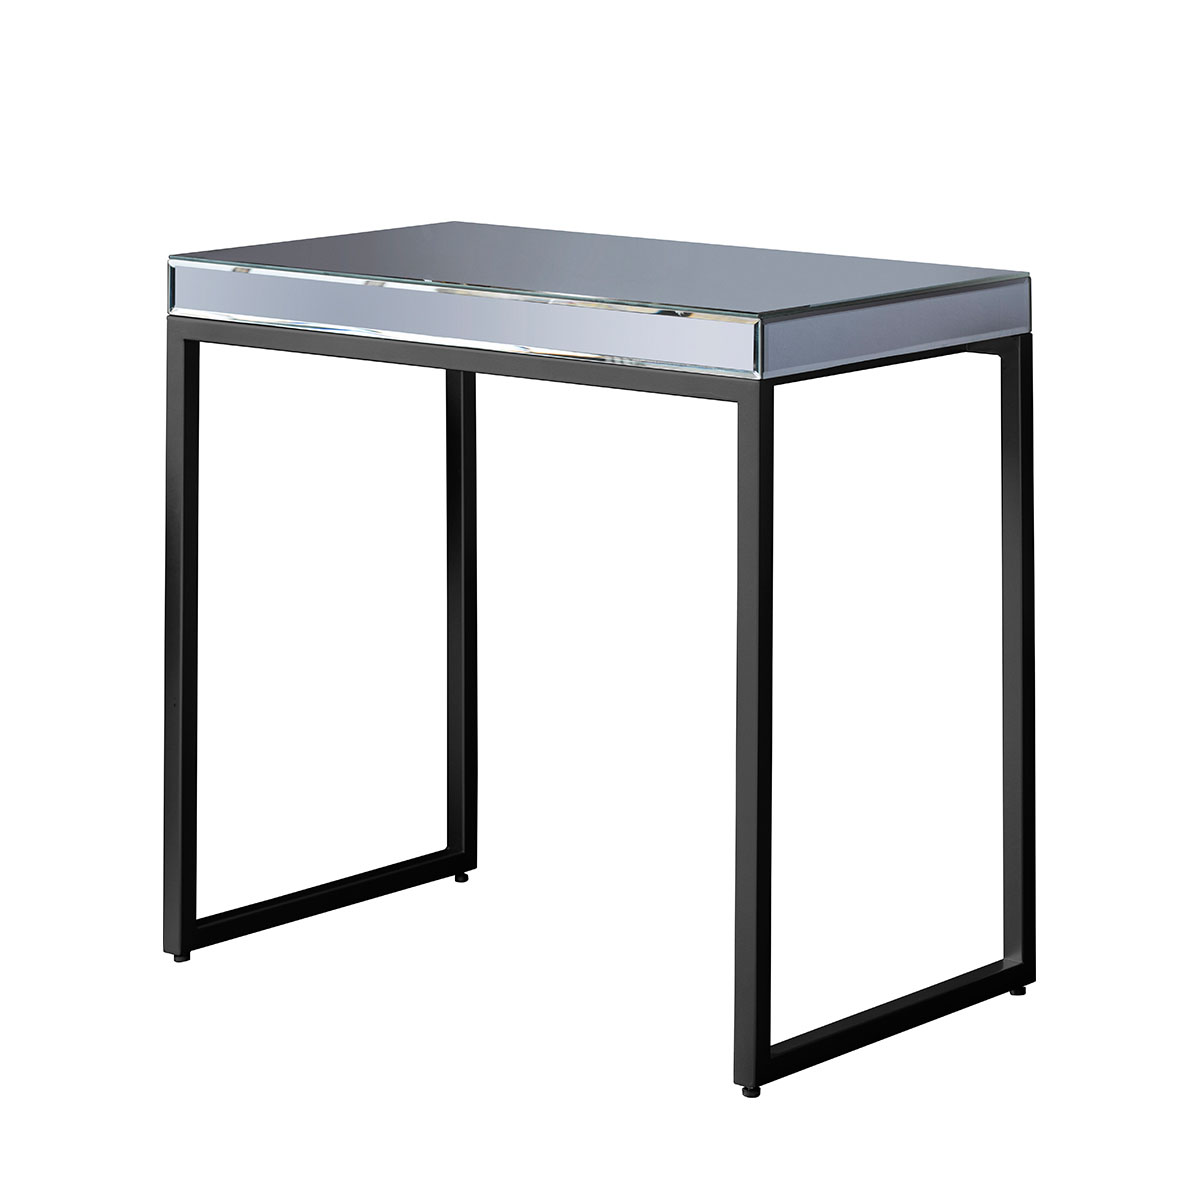 Pippard Side Table Black 610x380x620mm